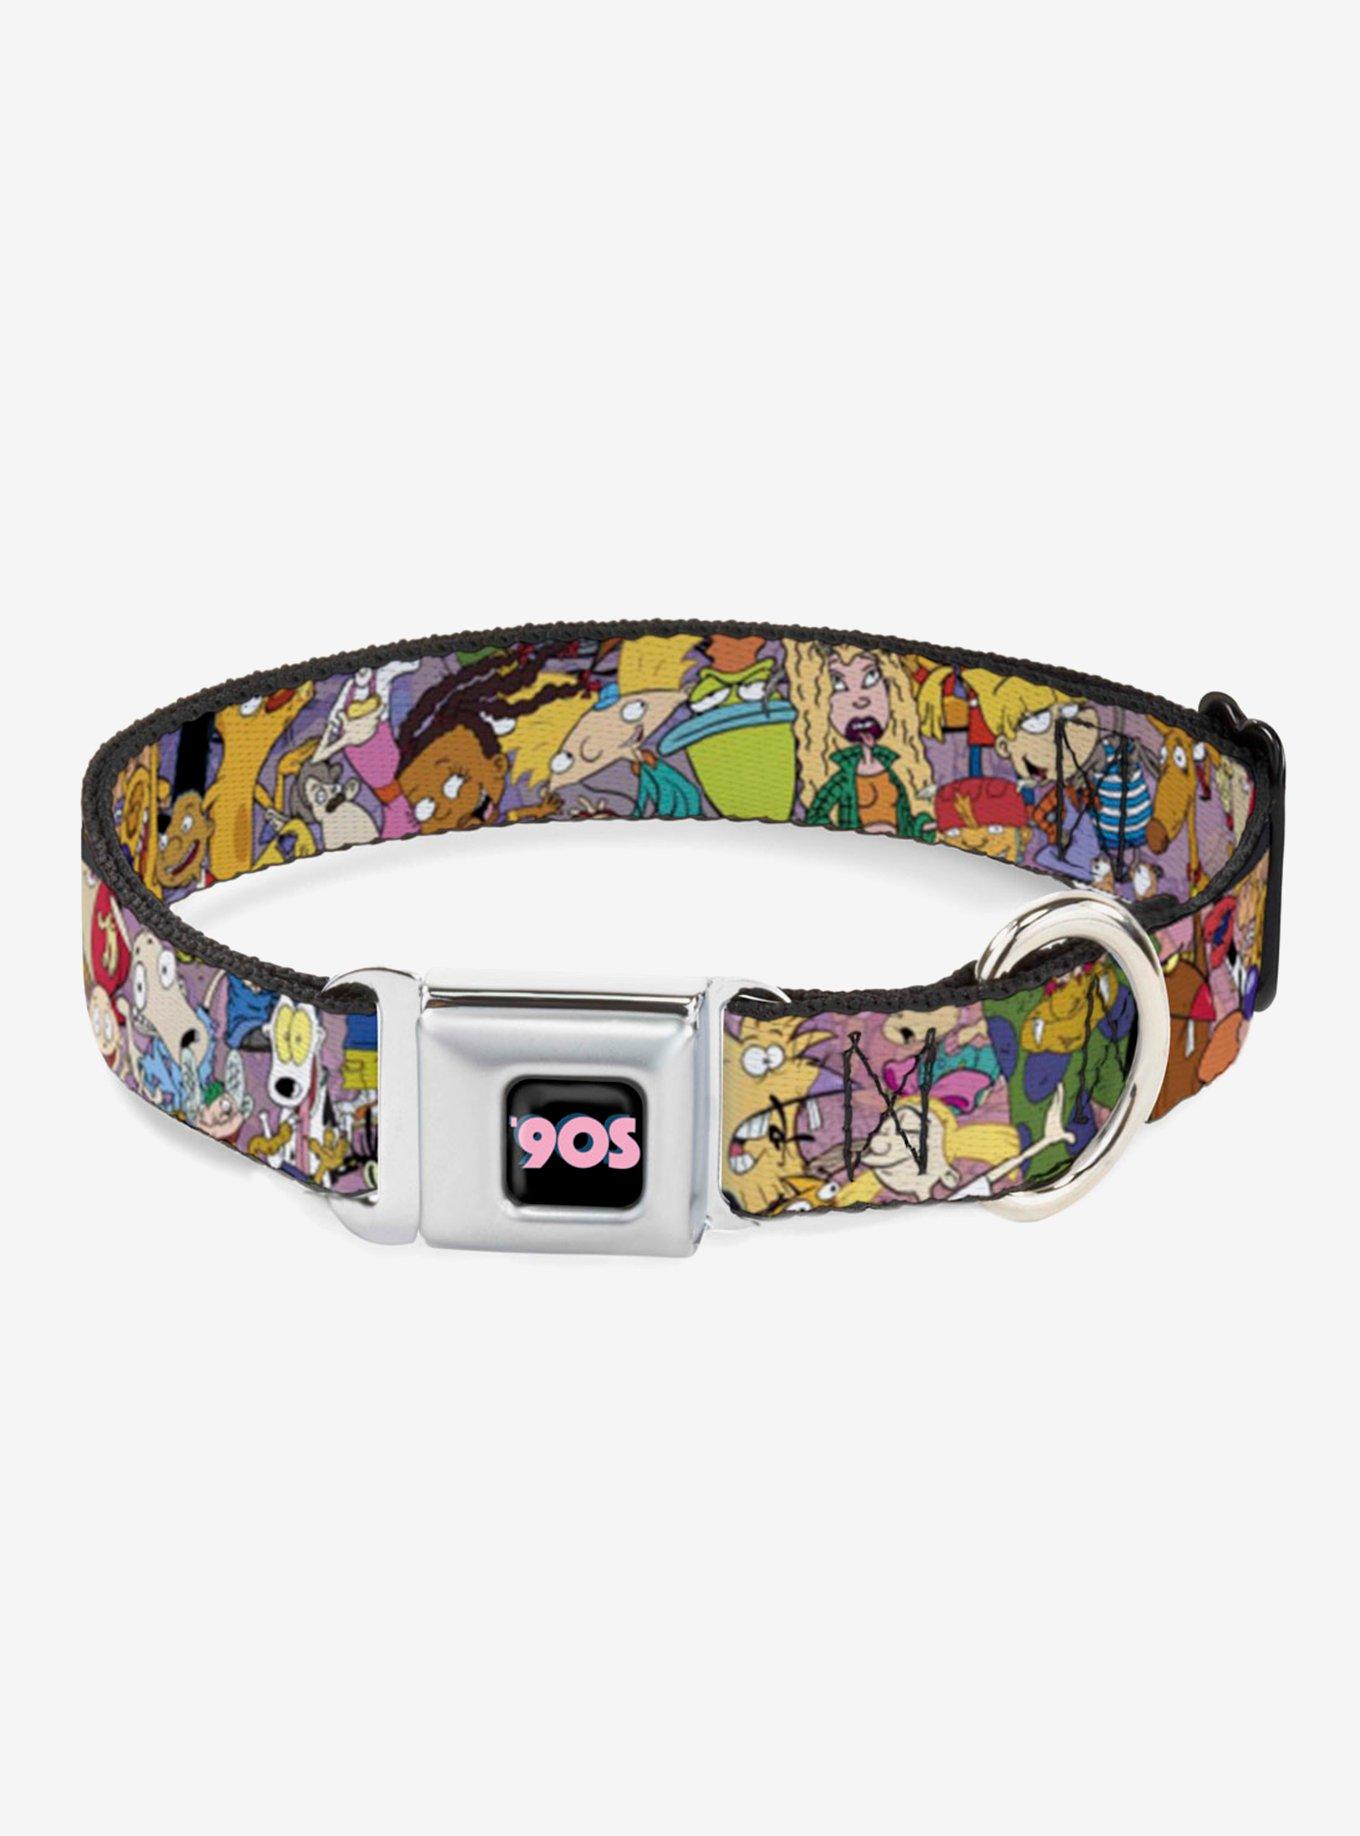 Nickelodeon 90's Rewind Character Mash Up Collage Dog Collar Seatbelt Buckle, MULTICOLOR, hi-res